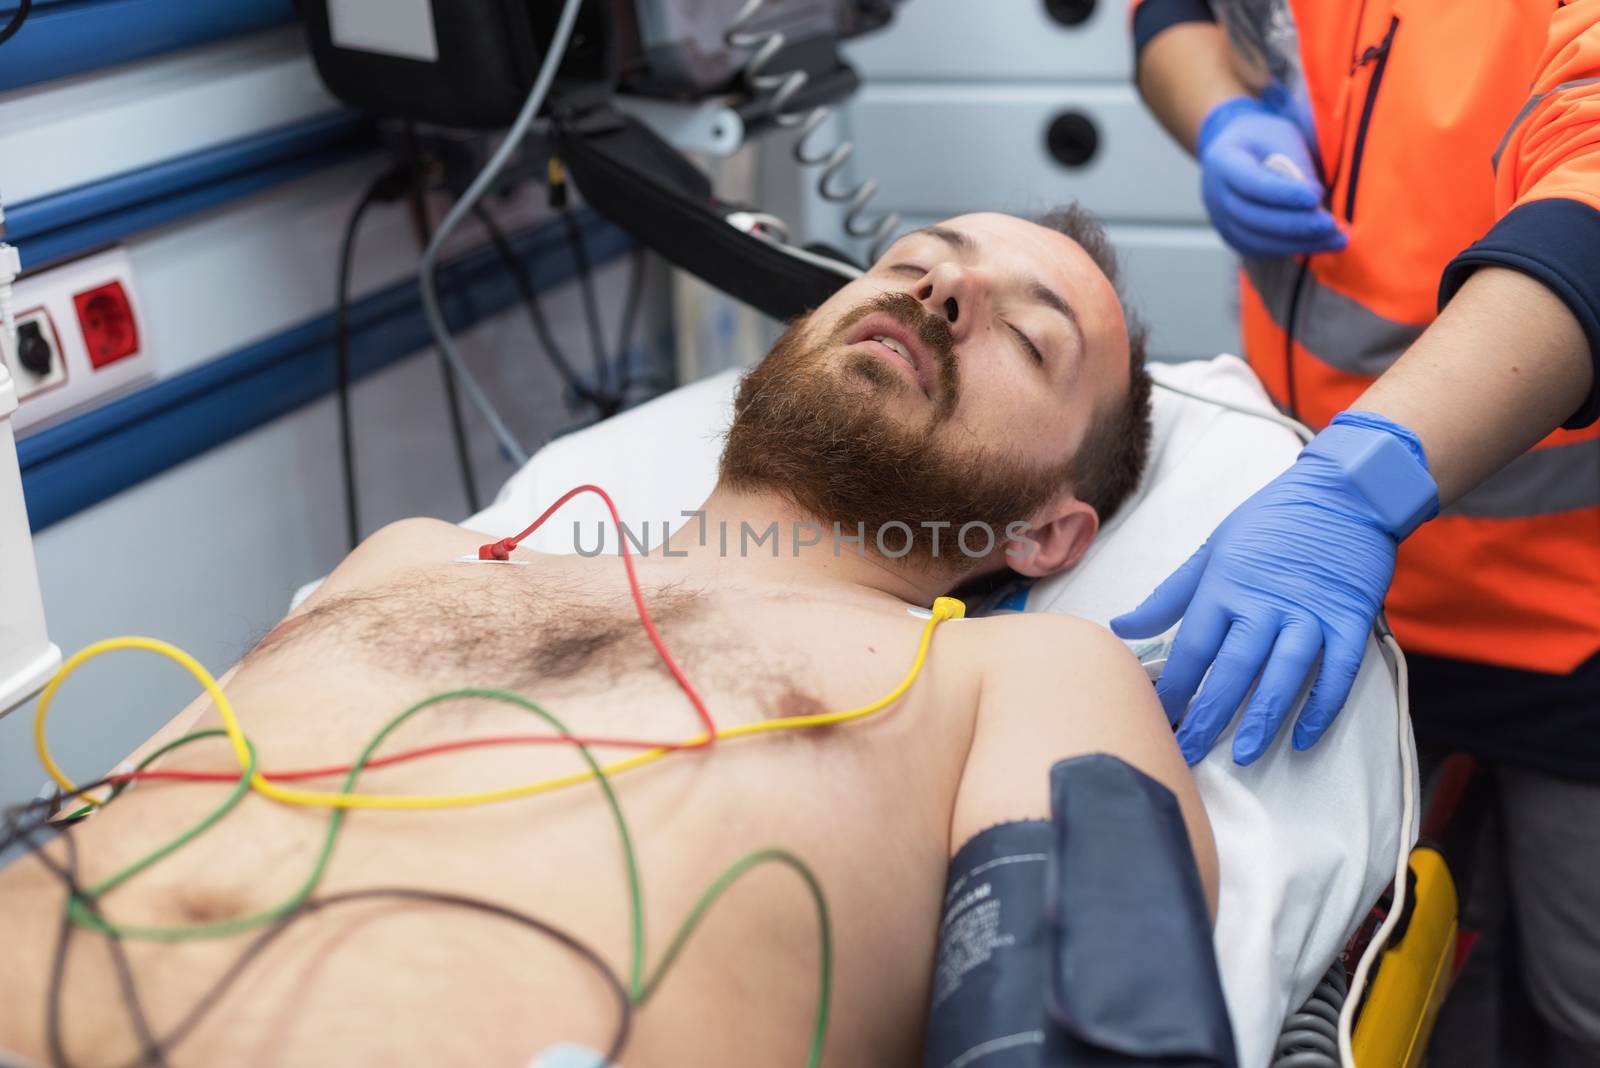 ecg electrodes on patient chest in ambulance by HERRAEZ